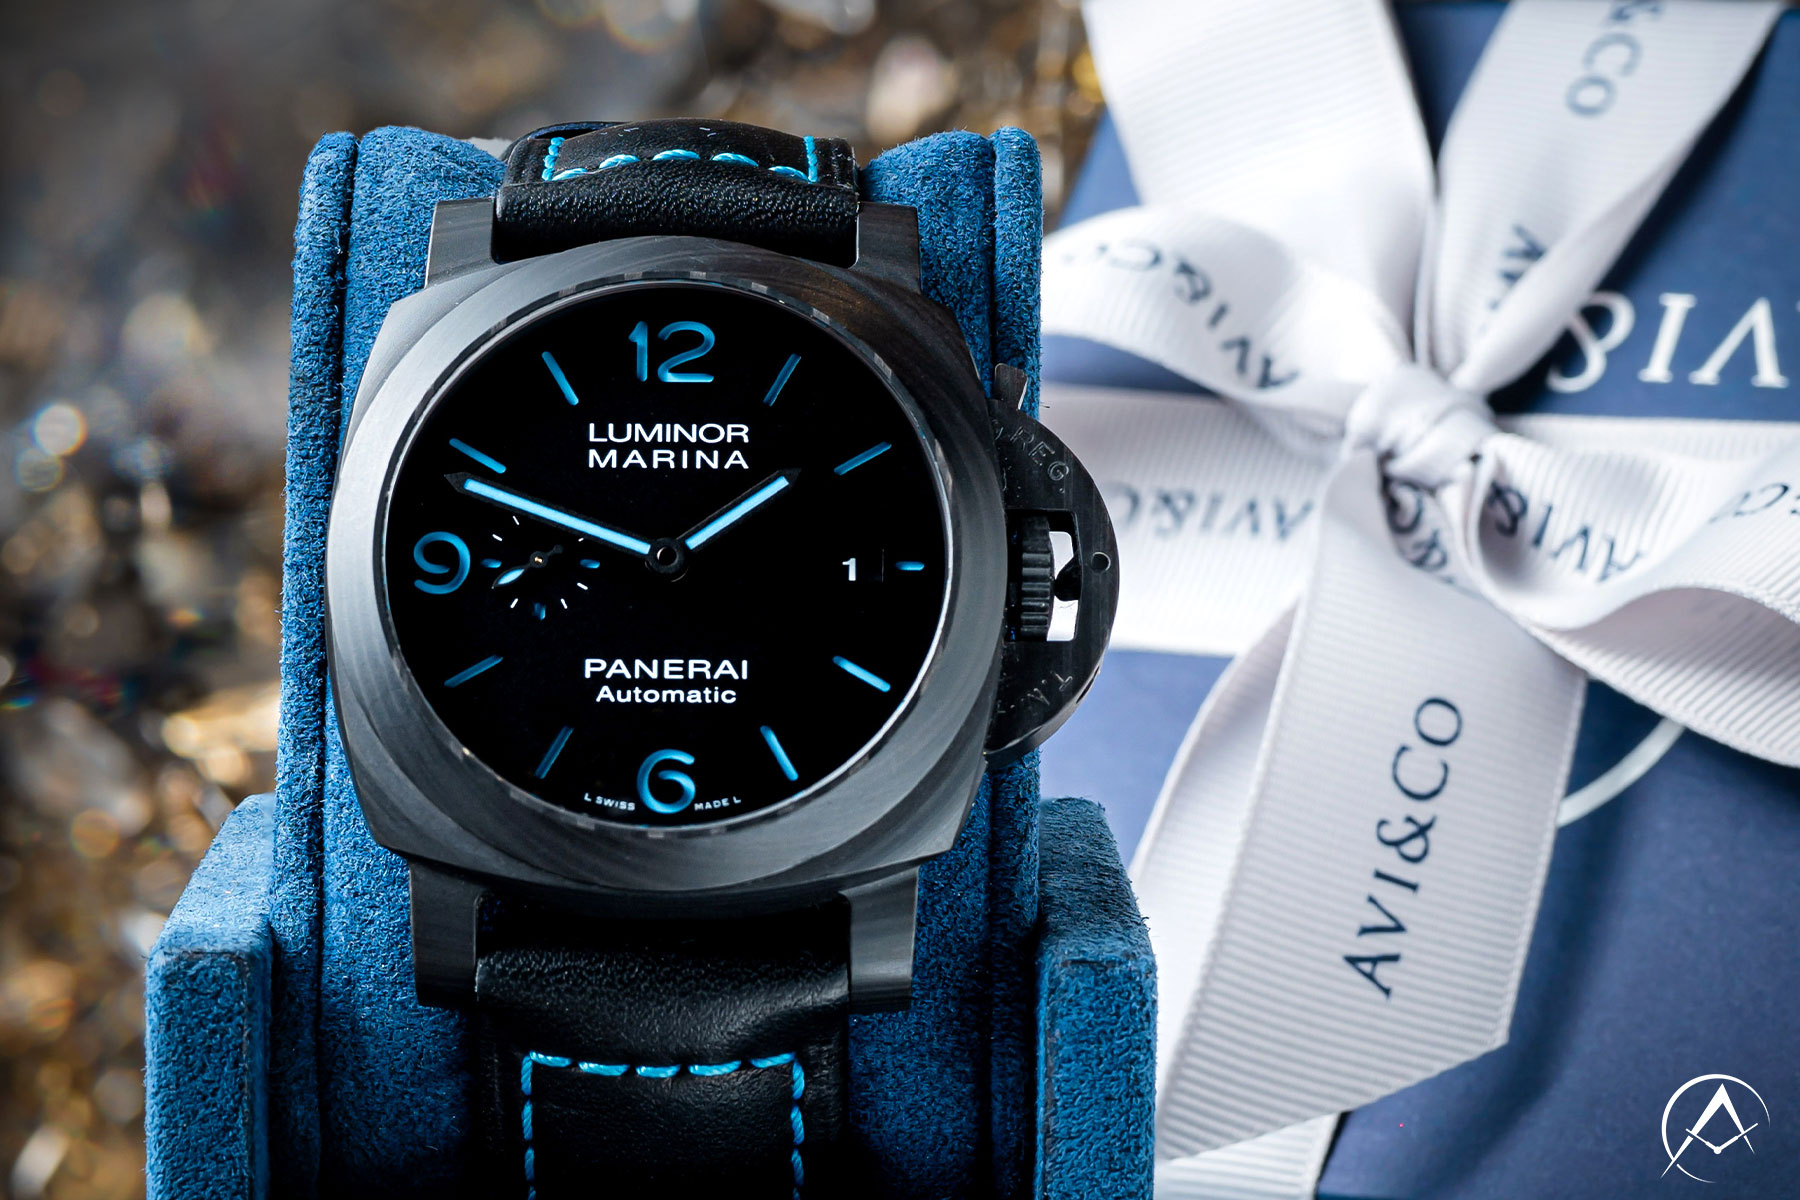 Panerai Luminor Marina Watch with 44 mm Carbon Case, Black Dial with Blue Luminous Hour Markers, and Black Leather Bracelet Displayed on a Blue Velvet Watch Cushion Beside a Blue and White Avi & Co. Gift Box.